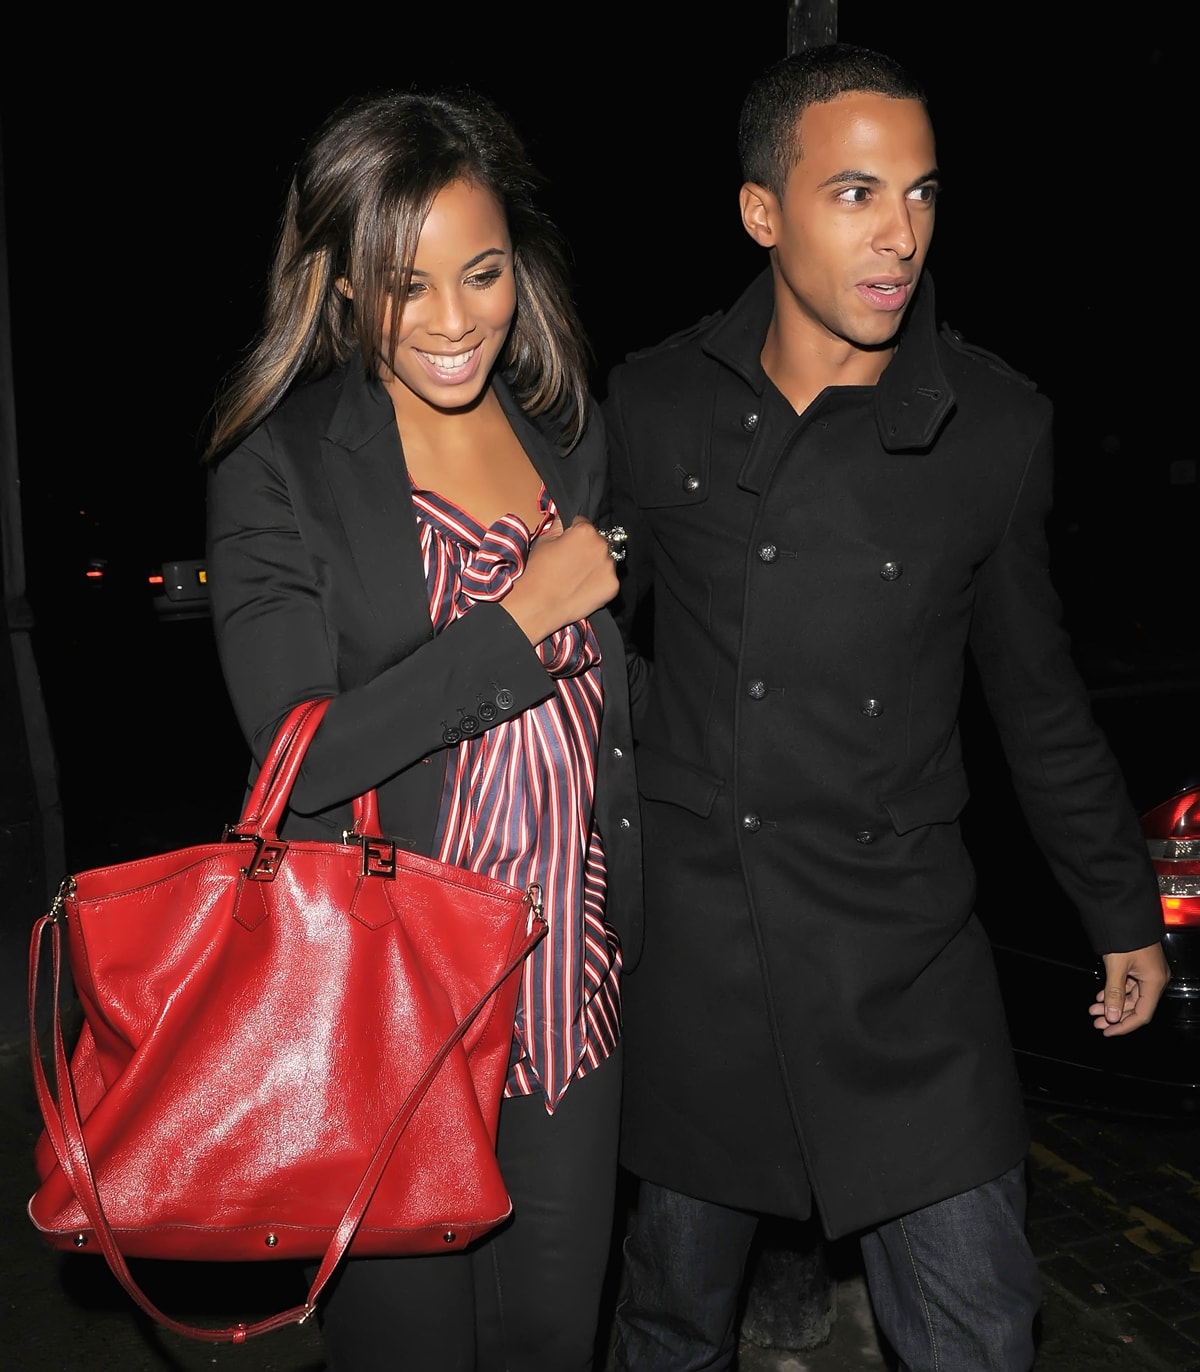 JLS band member Marvin Humes and The Saturdays singer Rochelle Wiseman started dating in 2010